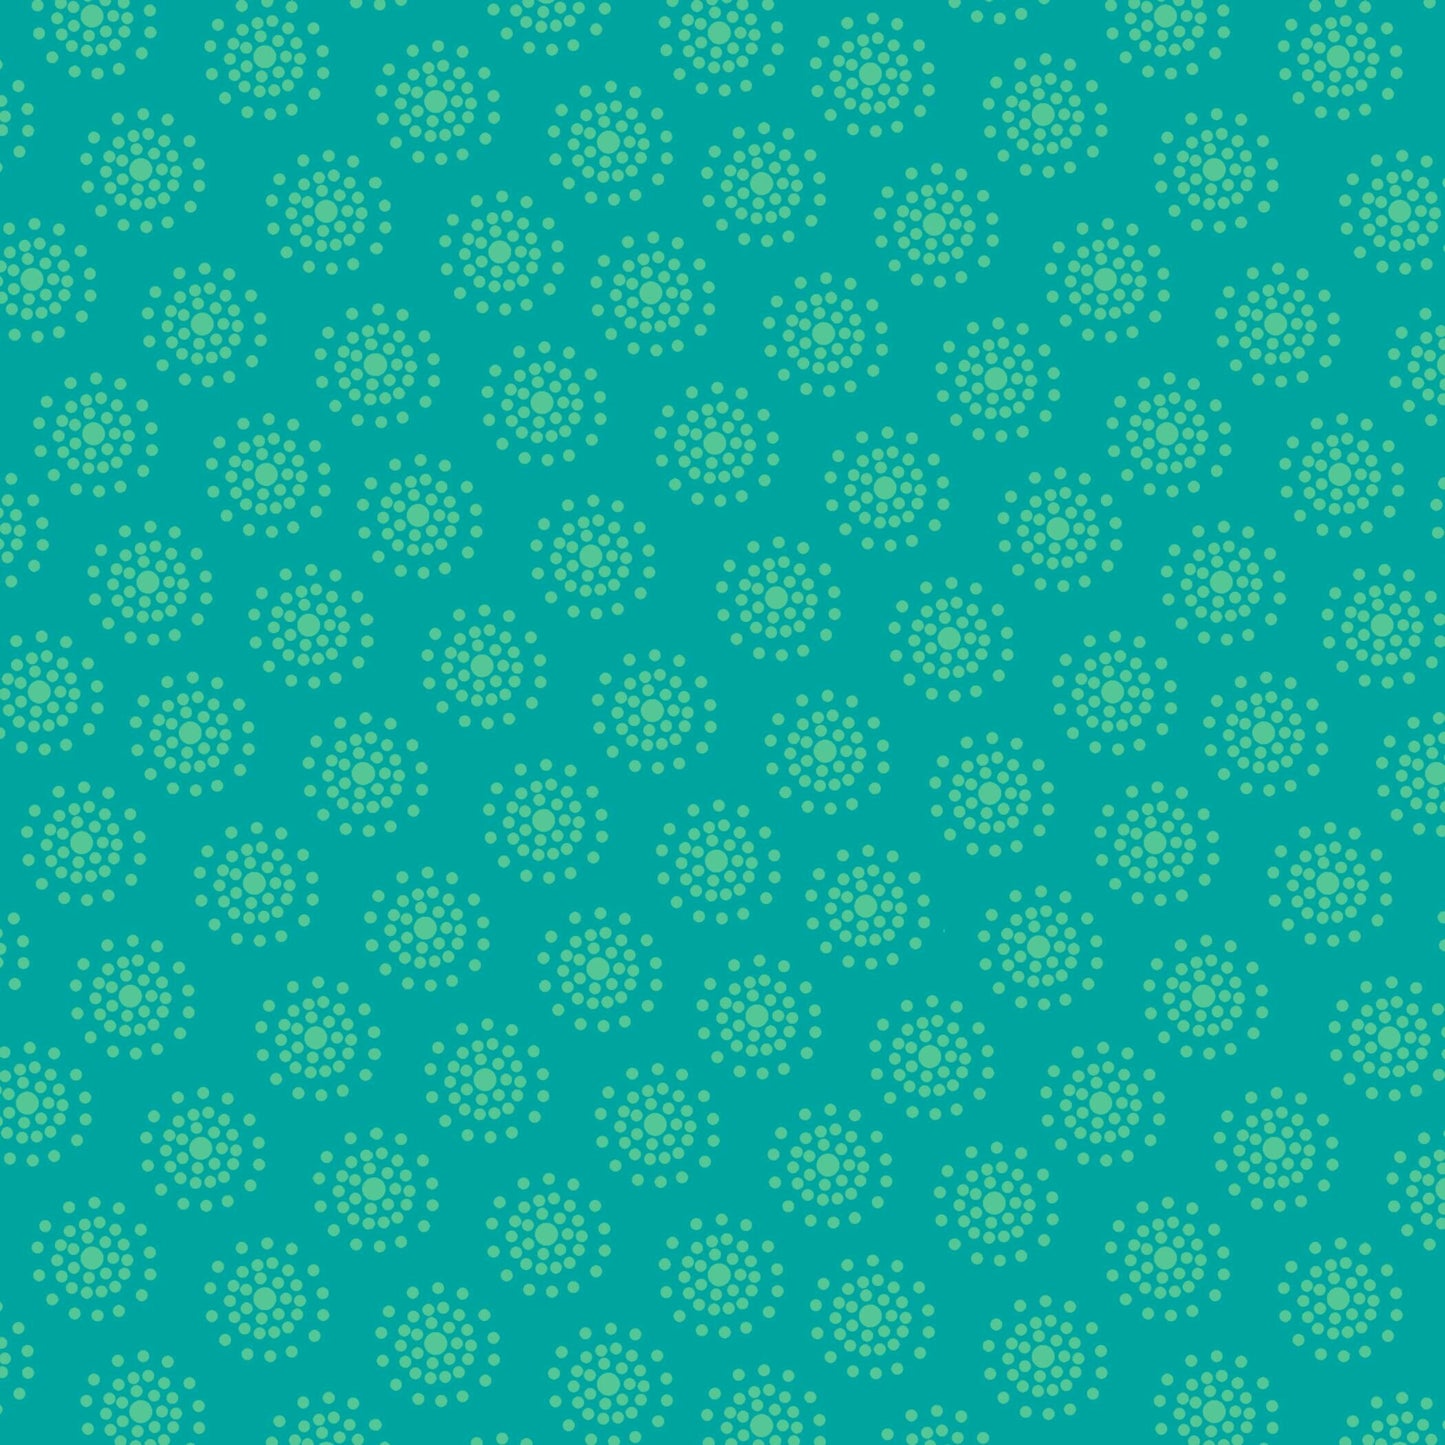 Owl's Woodland Adventure by Sharla Fults Tonal Dotted Dots Teal 5082-66 Cotton Woven Fabric